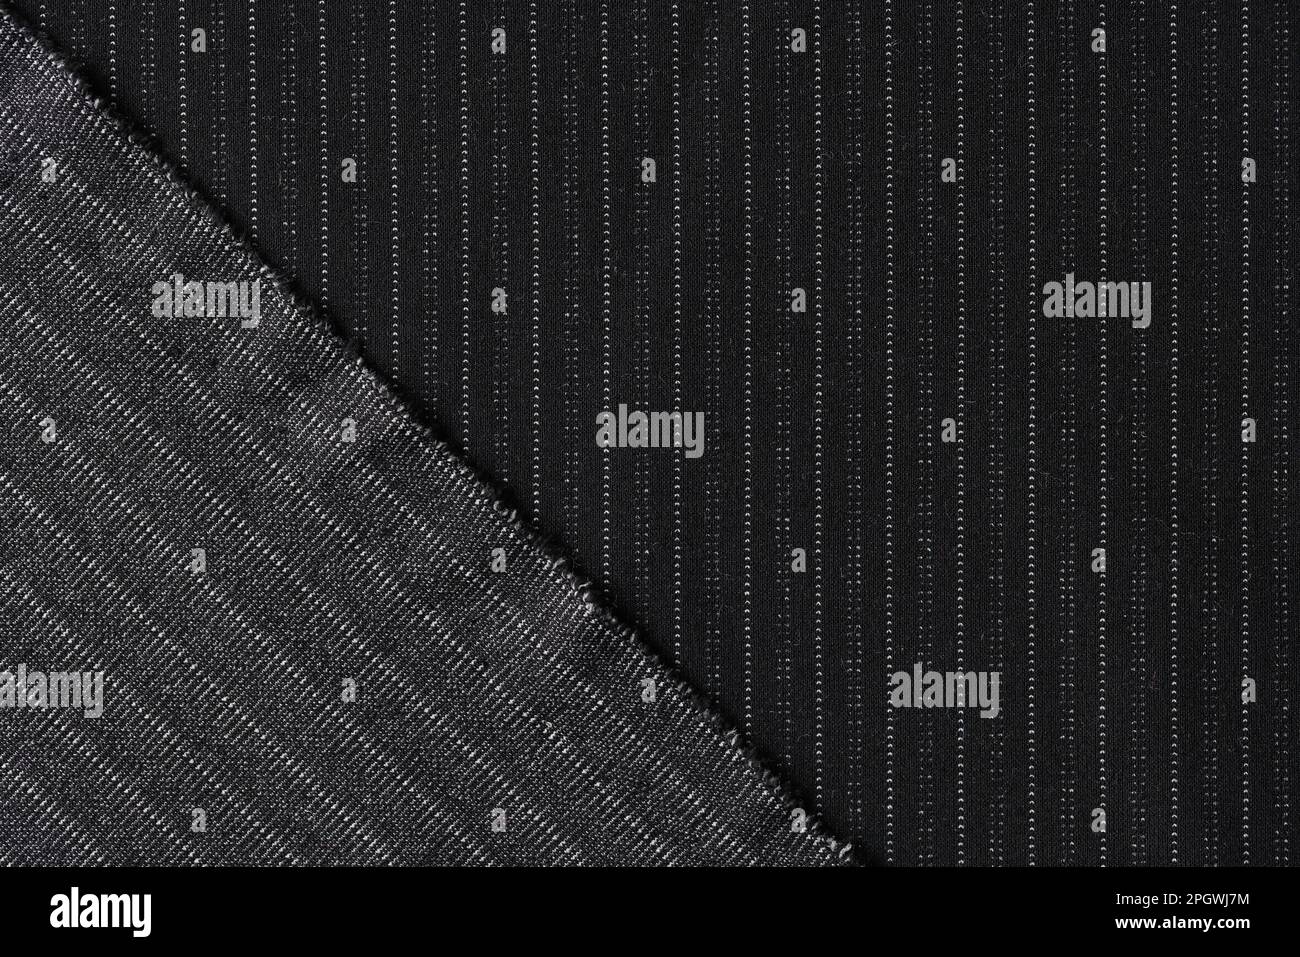 Black woolen fabric with dotted lines for formal clothes Stock Photo